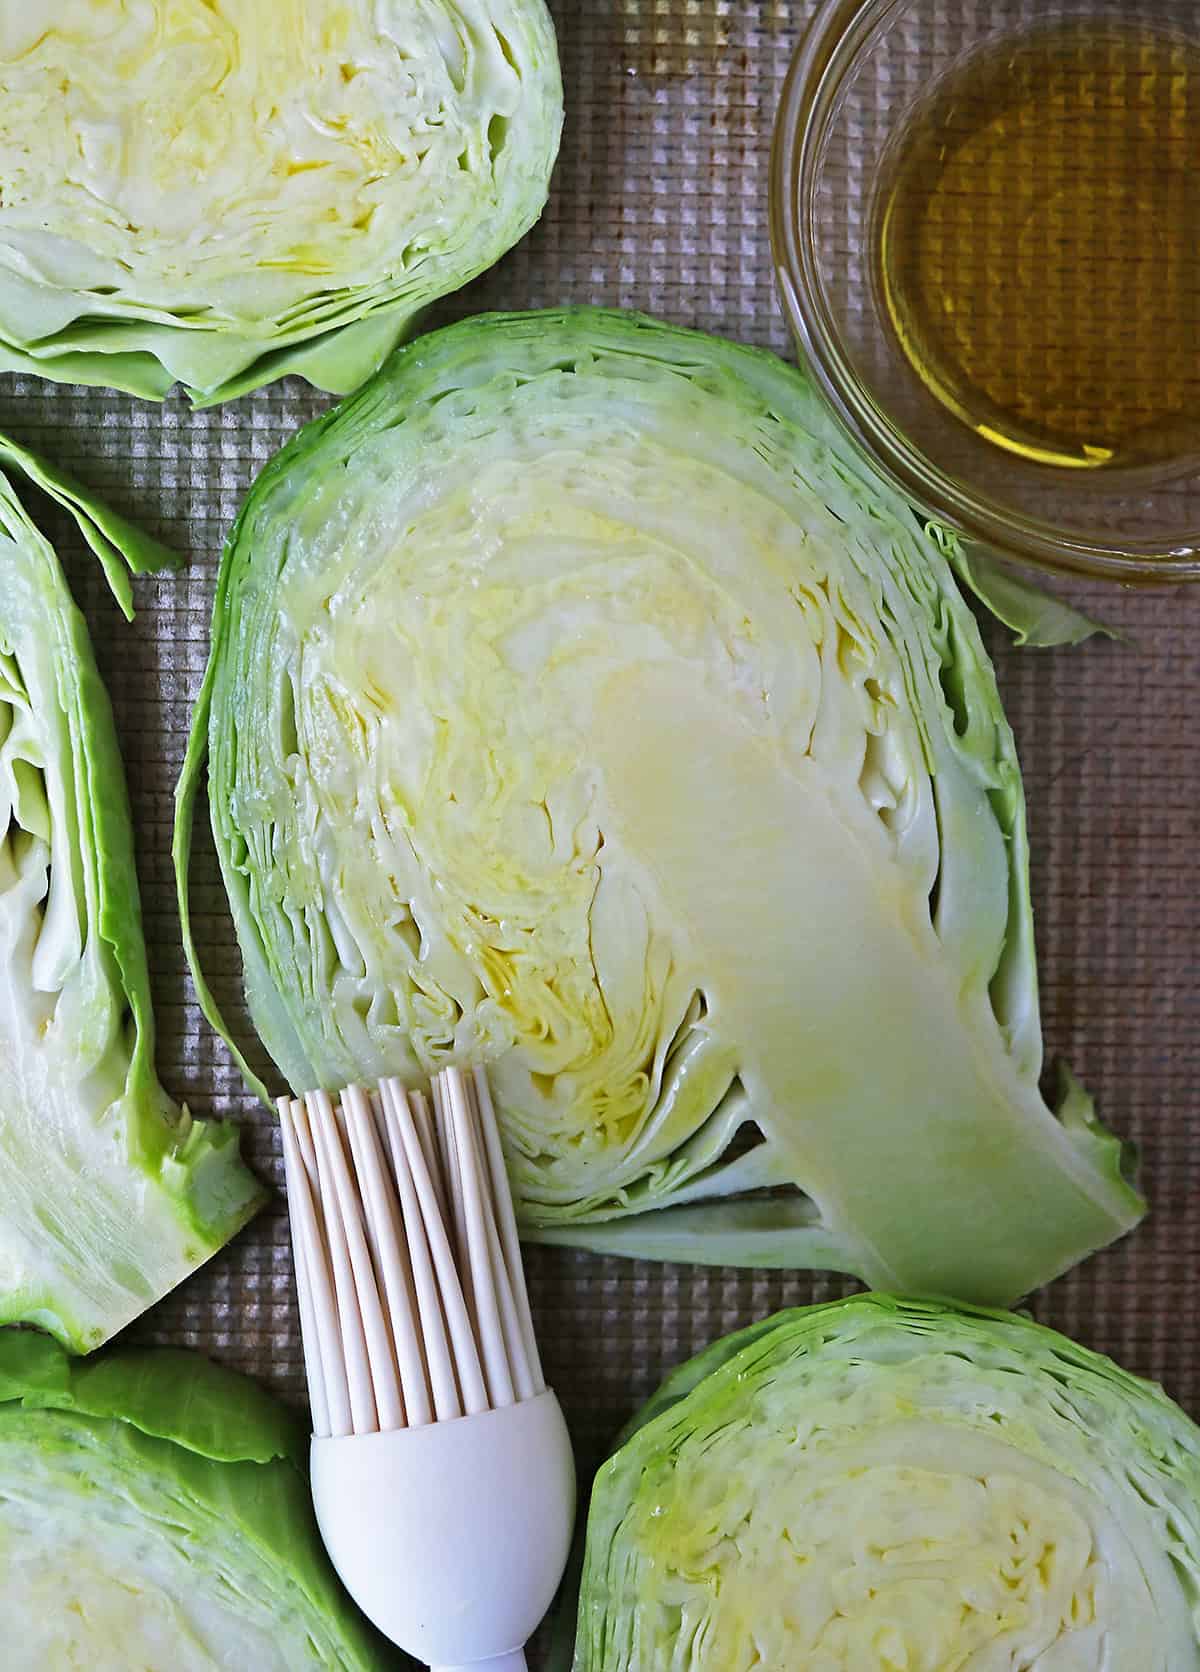 prepping Cabbage steaks for roasting